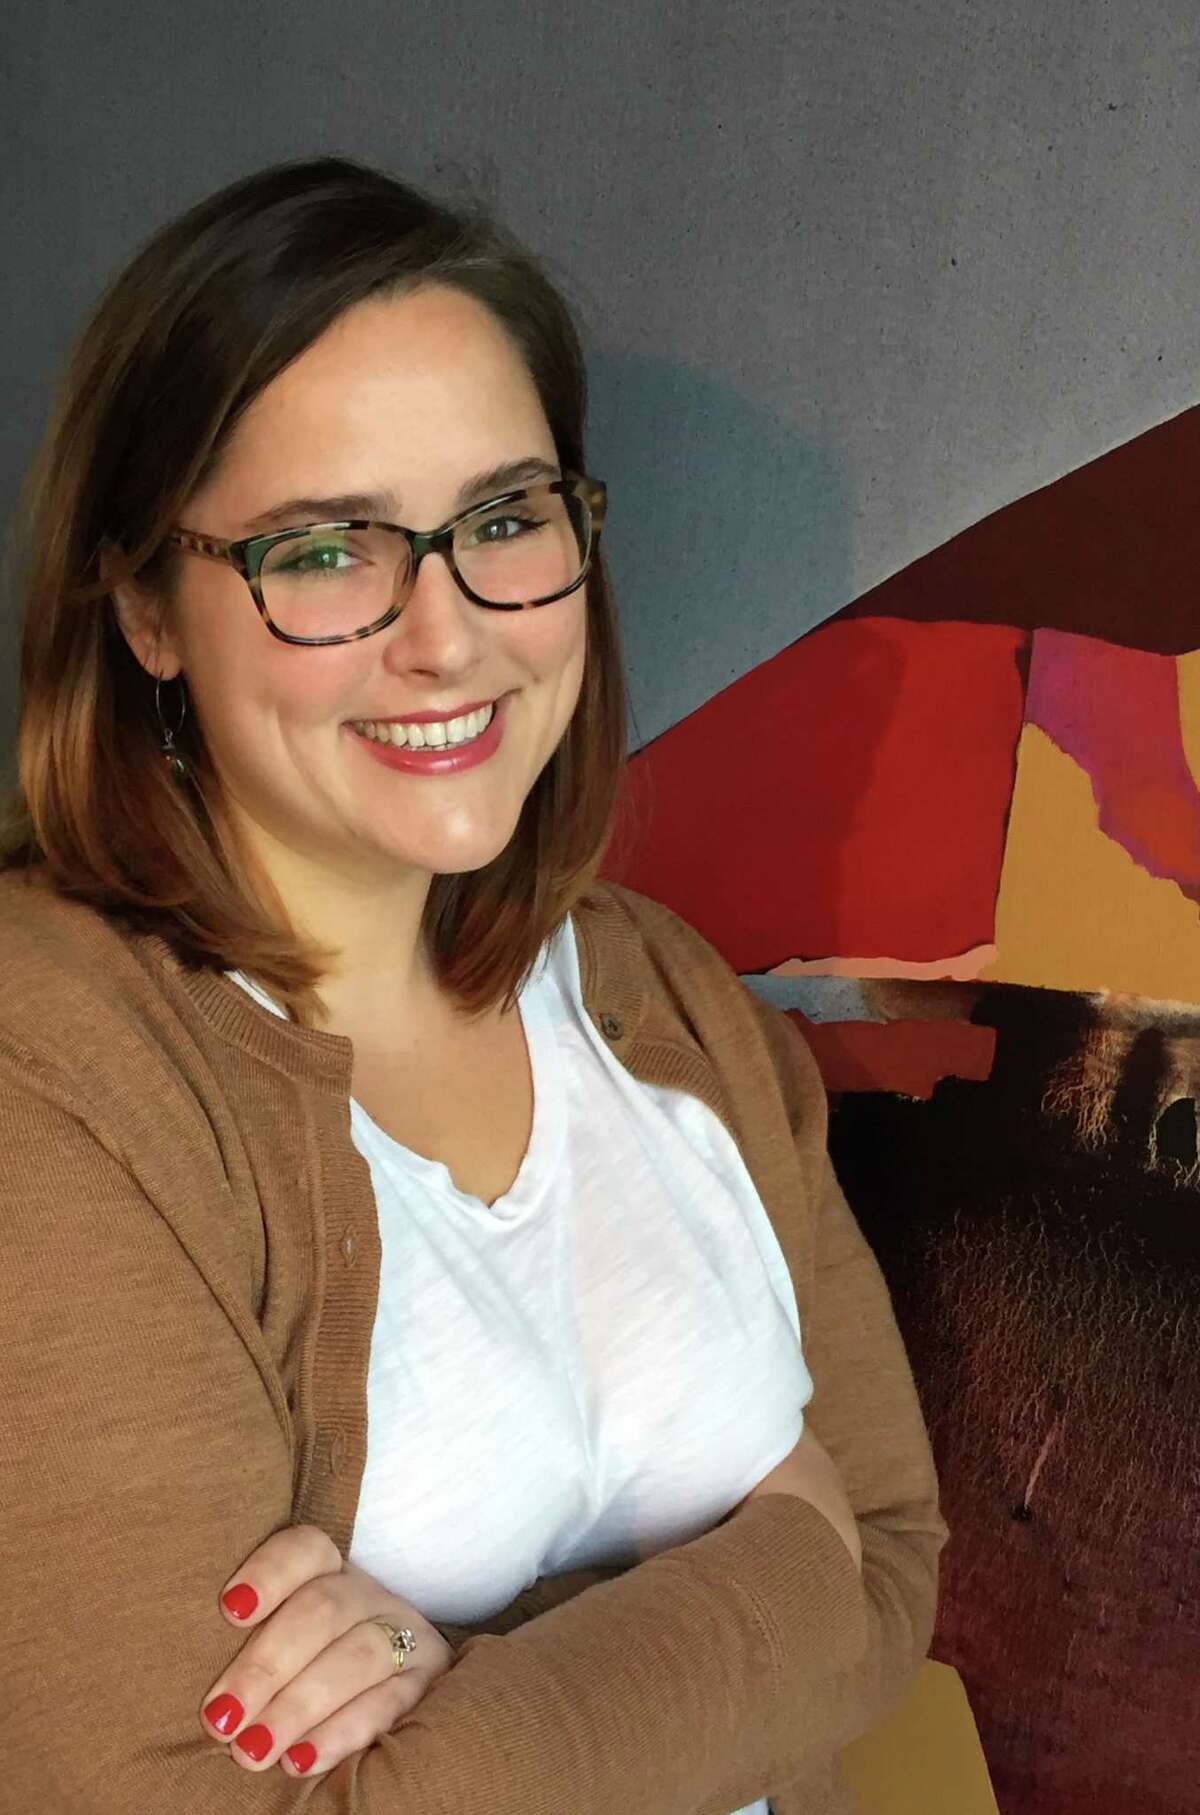 Art League Houston has appointed Sarah Beth Wilson its director and lead curator.